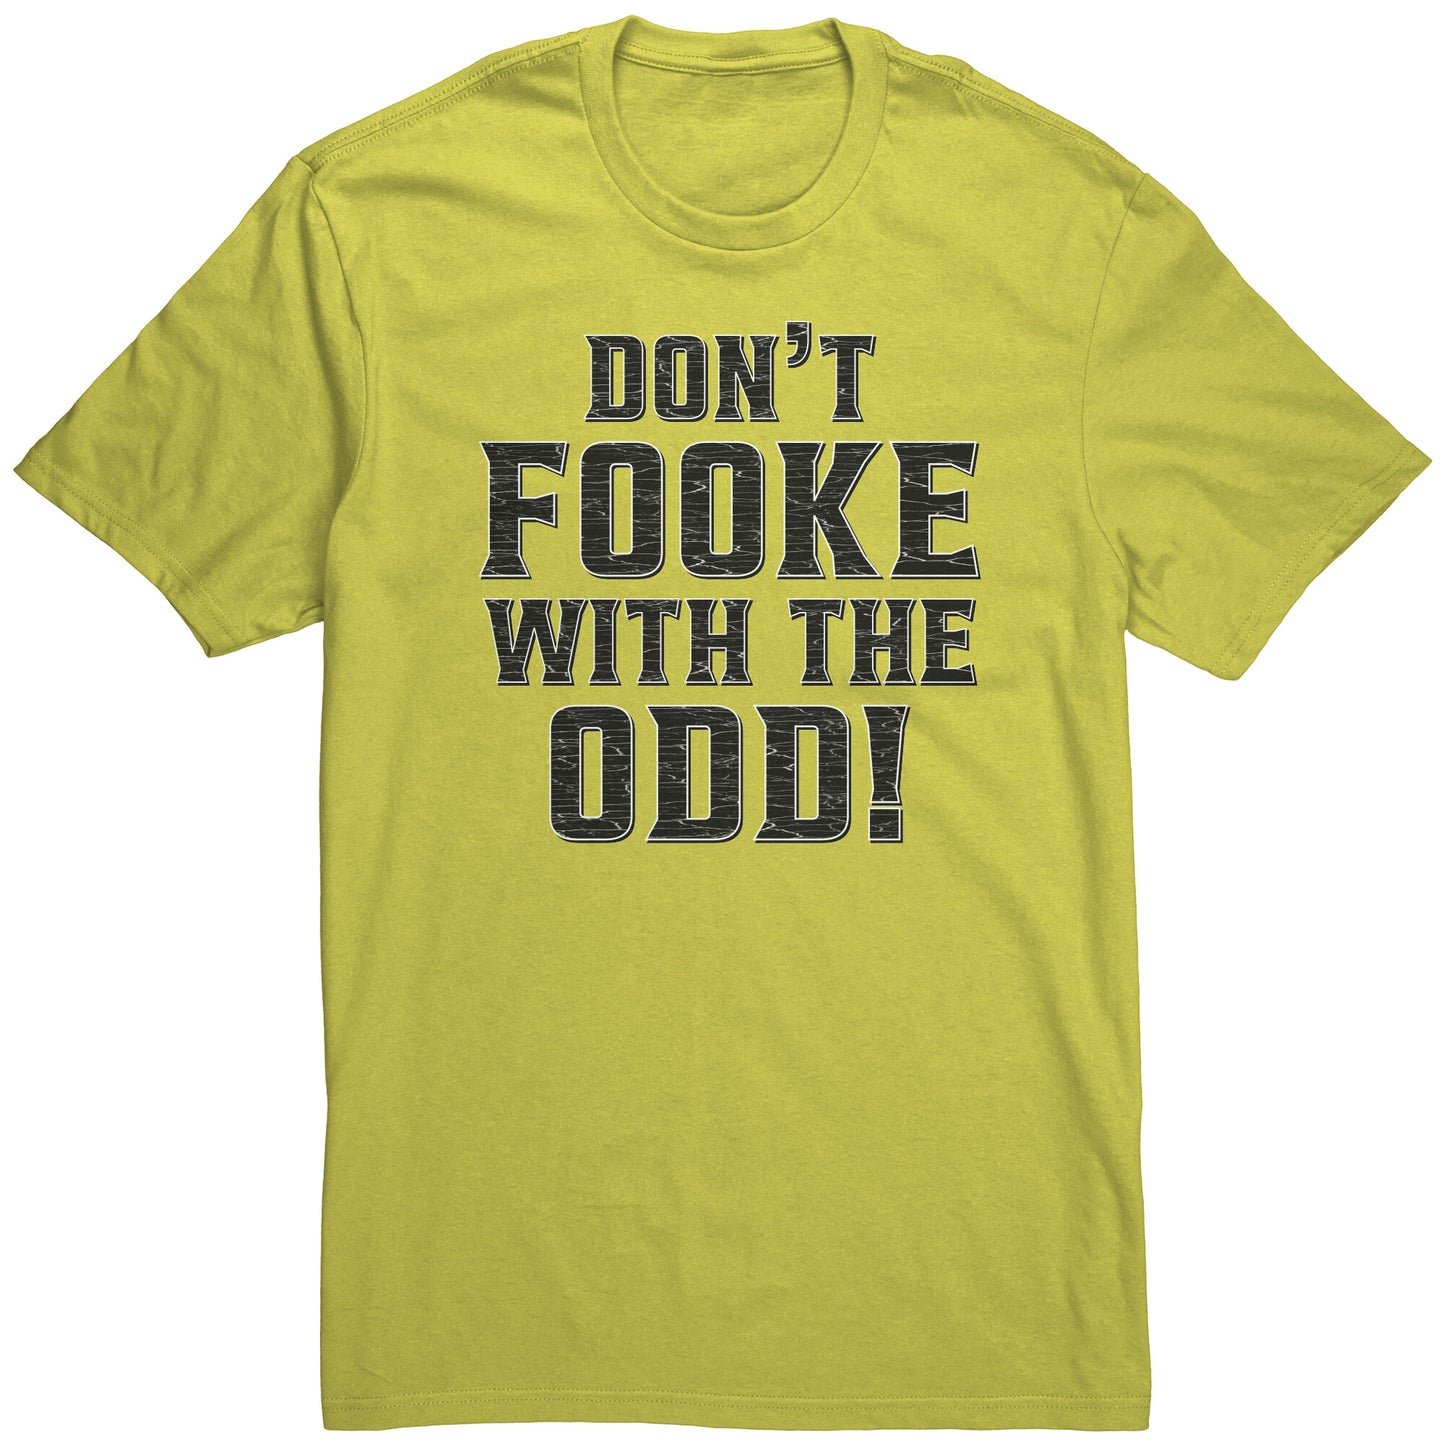 Don't Fooke With The Odd! Men's Light-Colored Tee